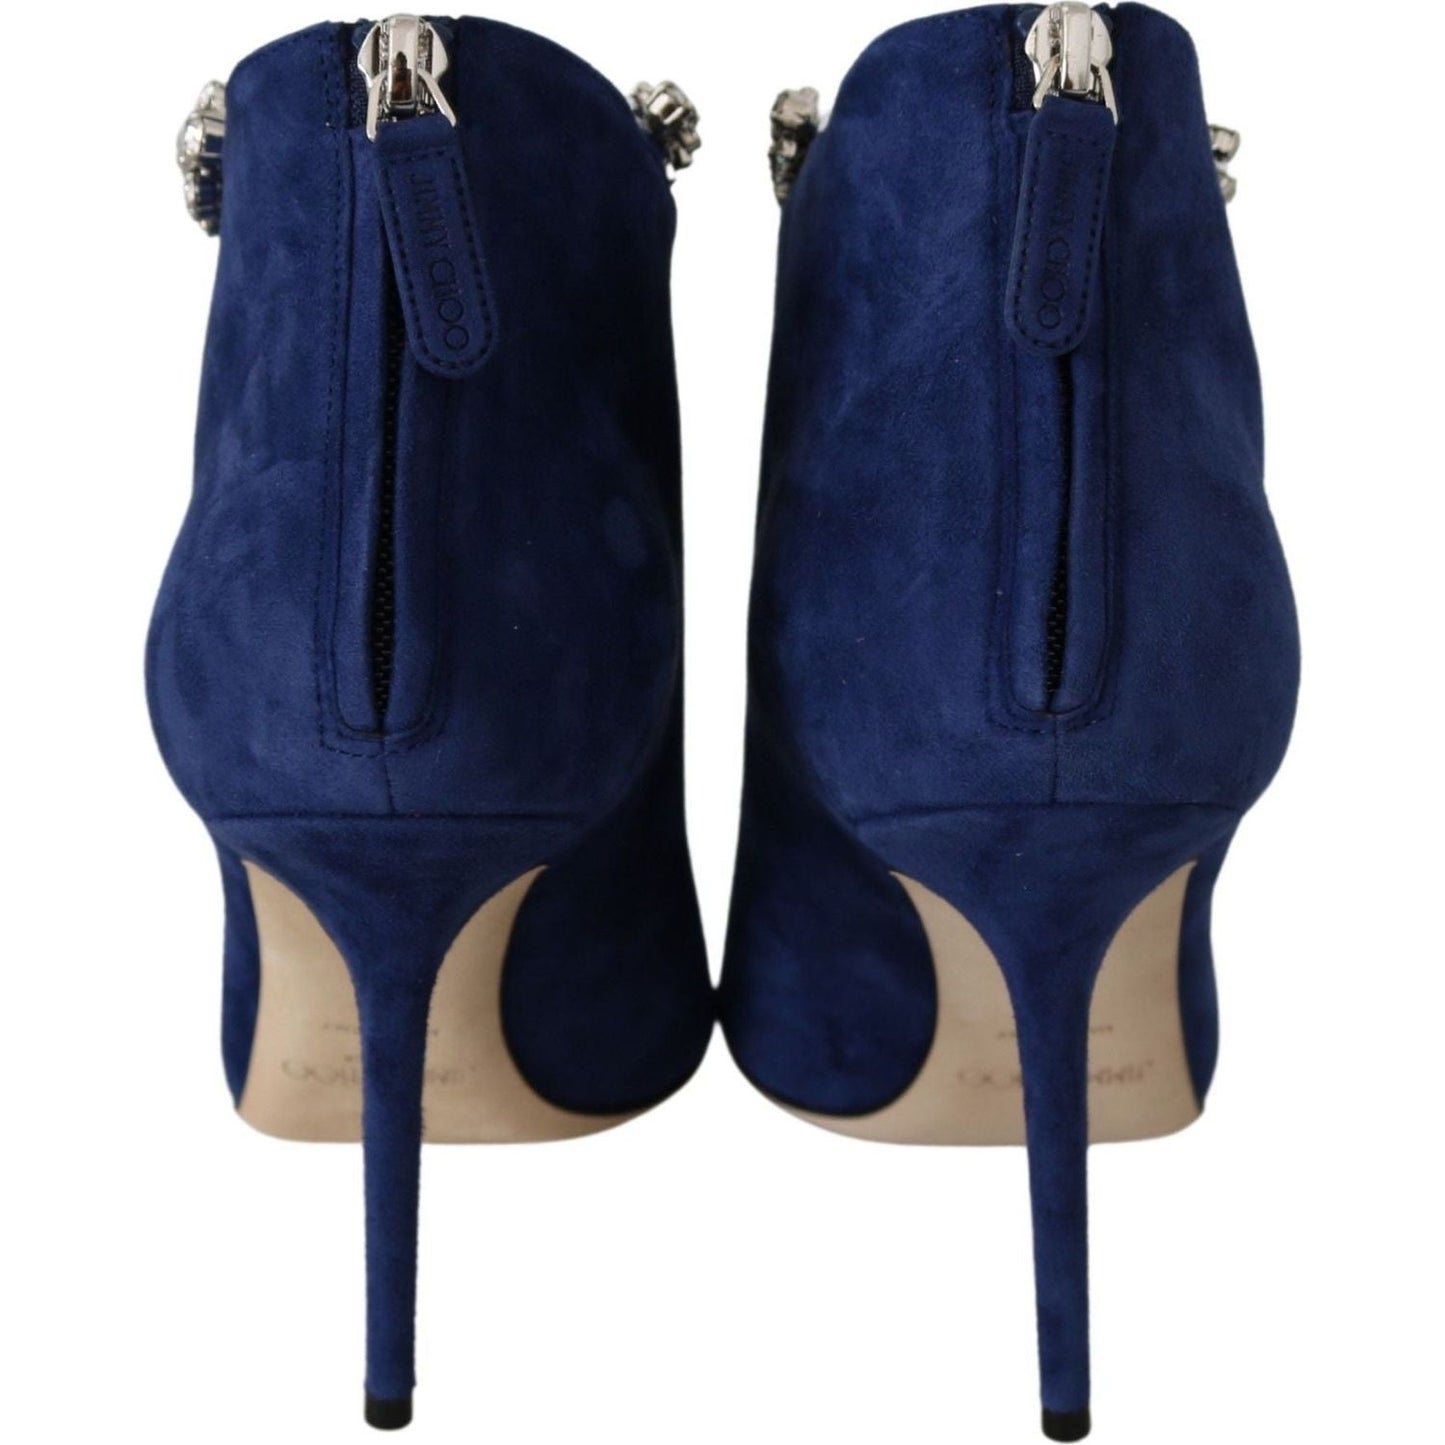 Jimmy Choo Pop Blue Crystal-Strap Heeled Boots blaize-100-pop-blue-leather-boots